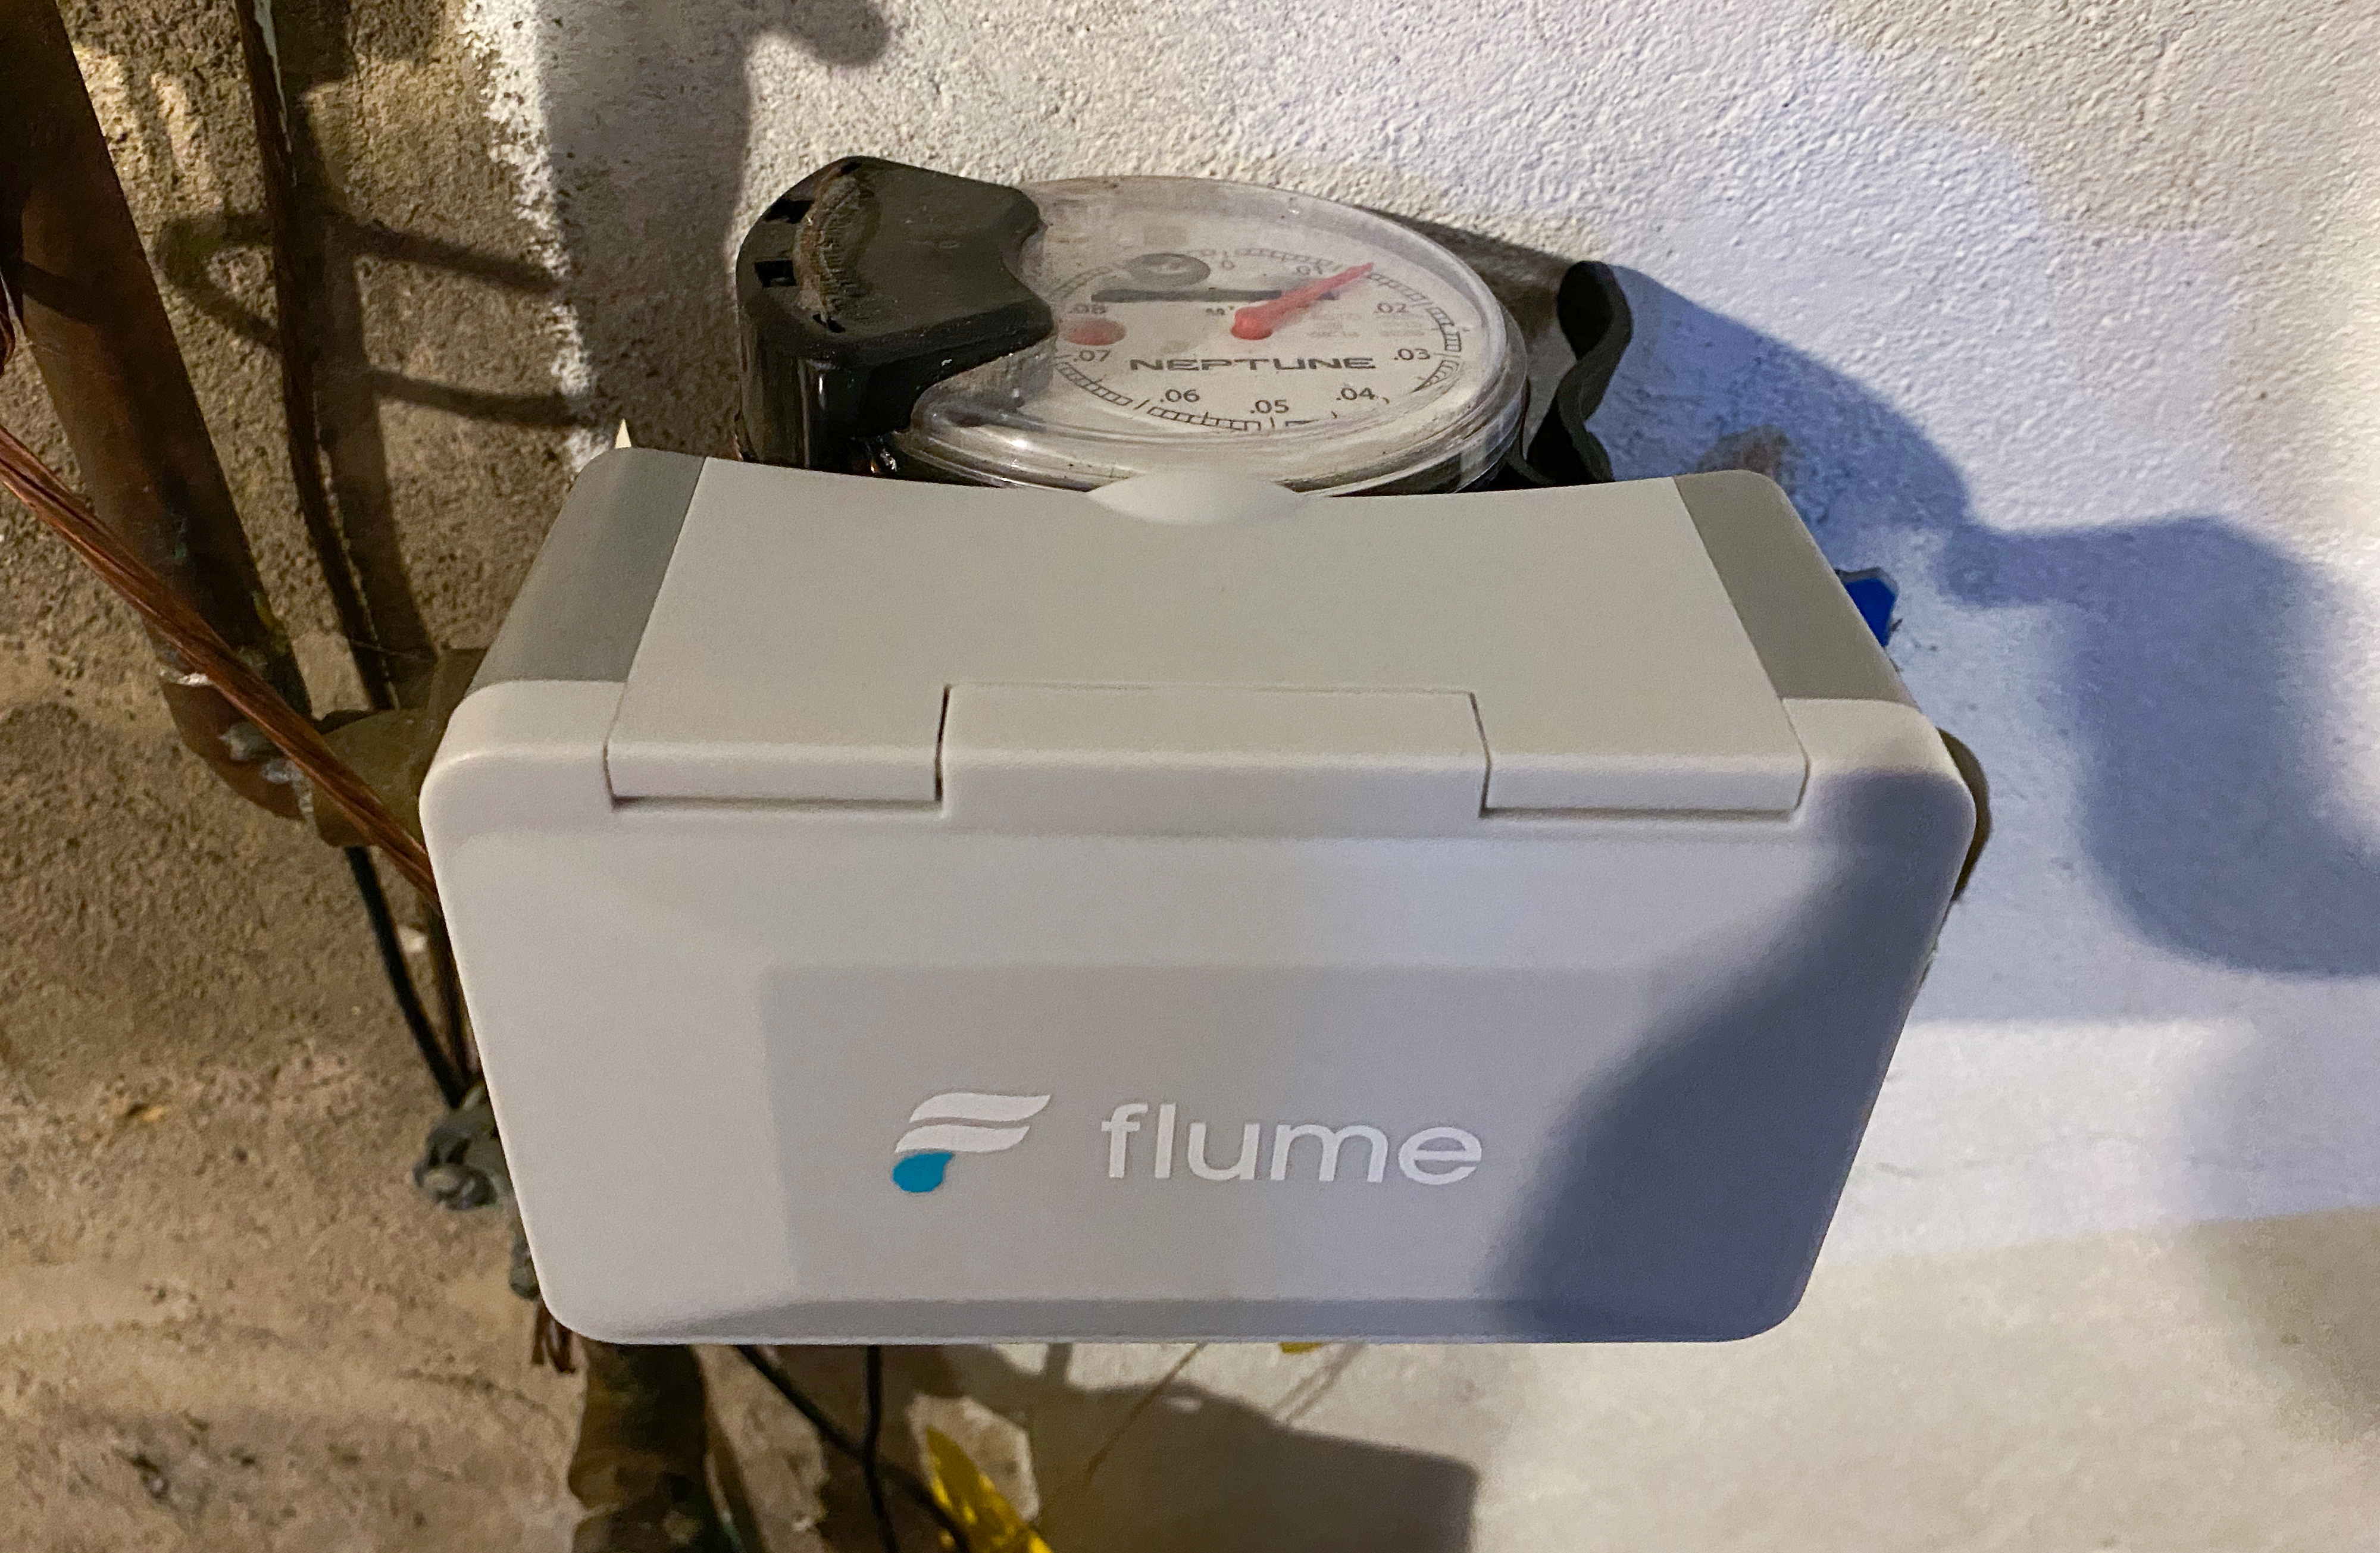 flume 2 smart water home monitor